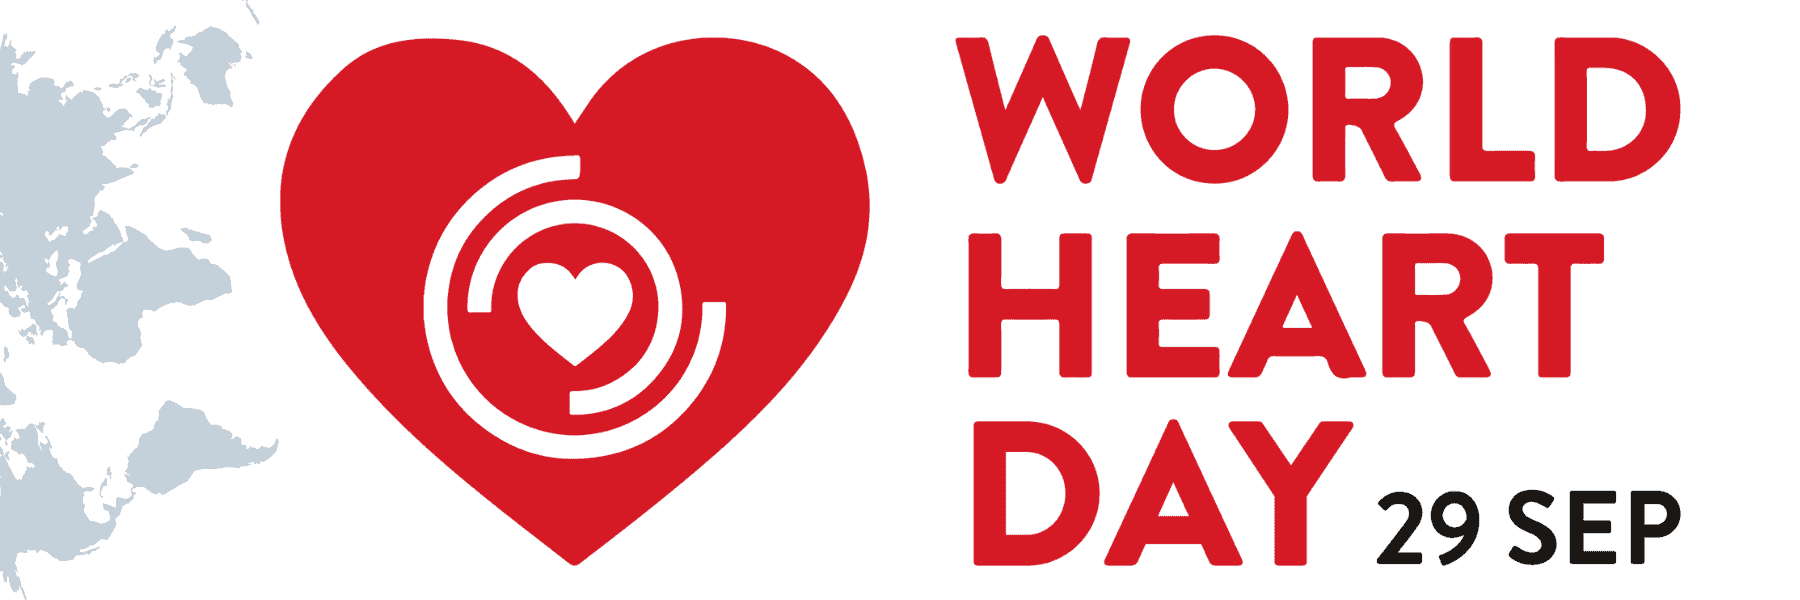 World Heart Day with red heart icon